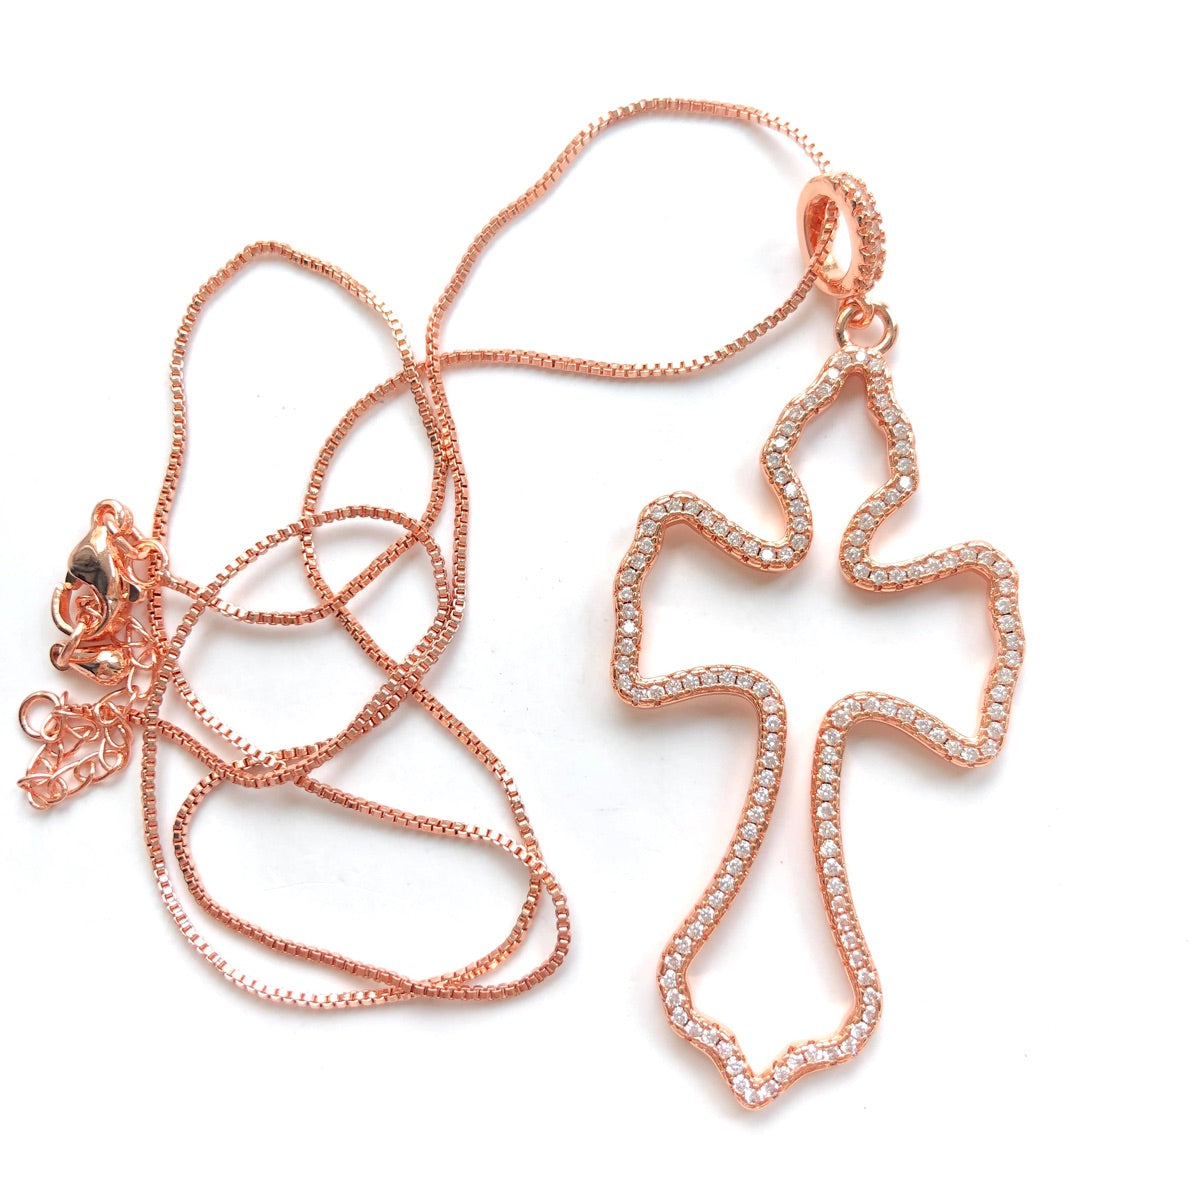 5pcs/lot CZ Paved Large Size Cross Necklaces Rose Gold Necklaces Charms Beads Beyond